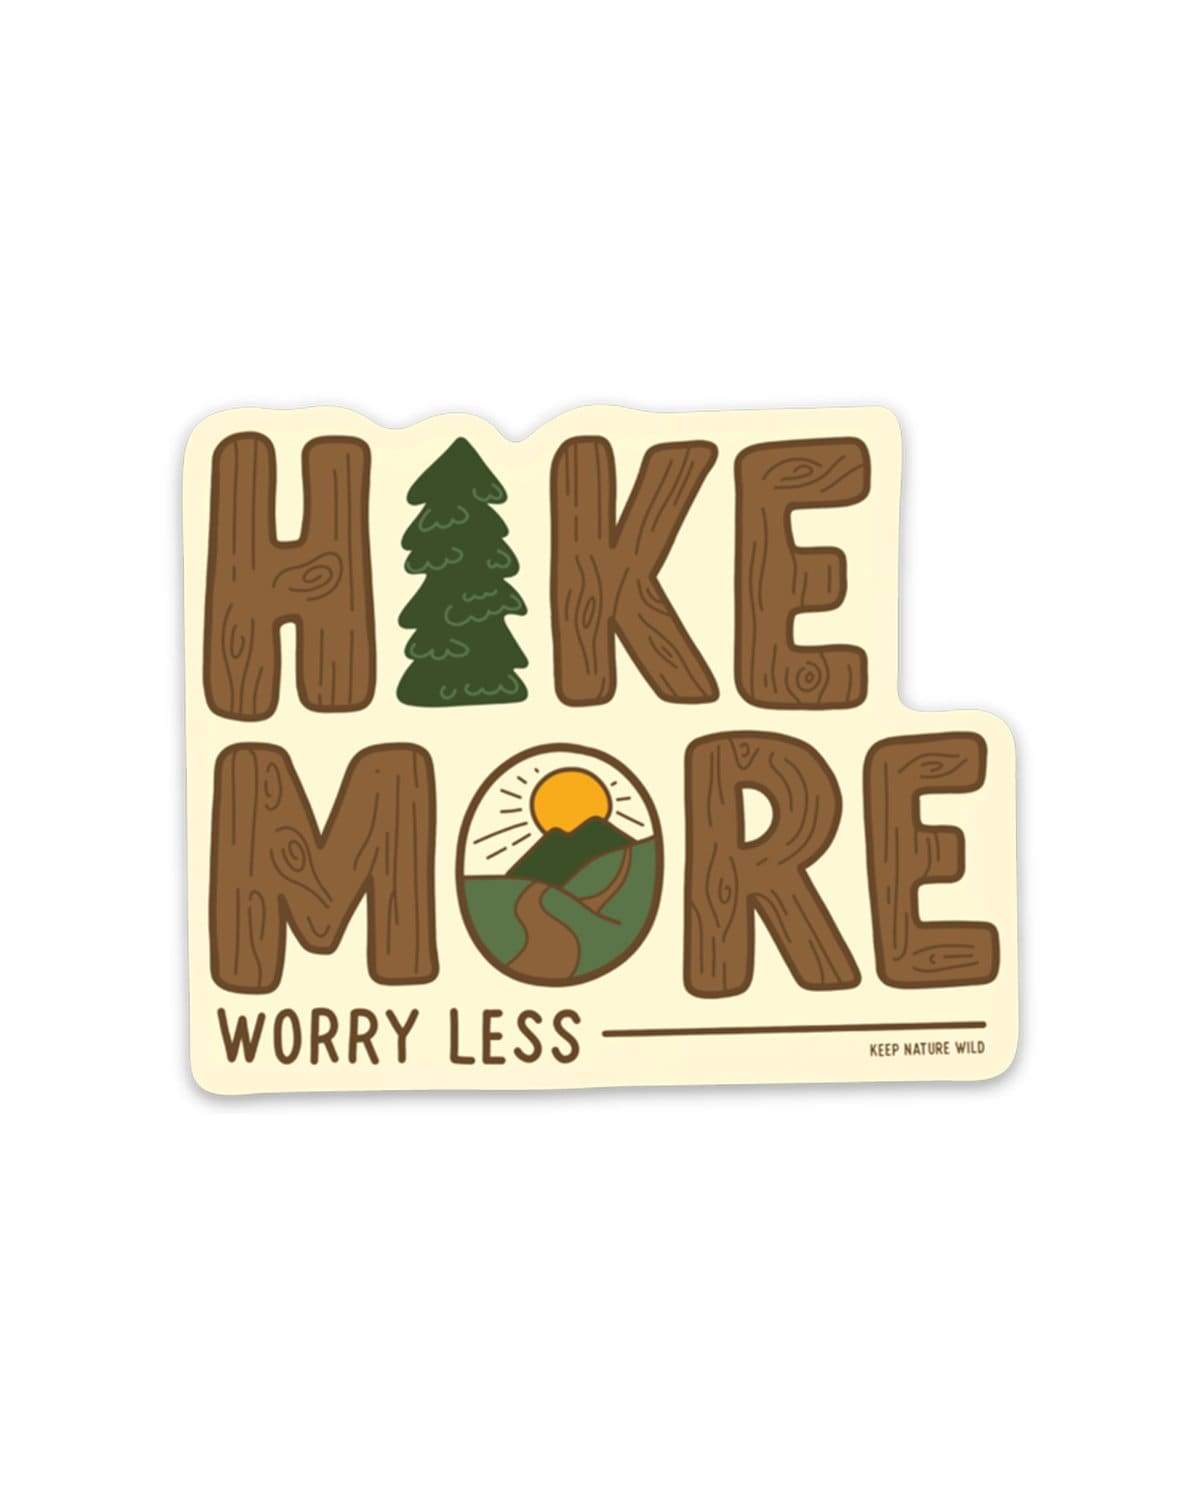 .com: camping stickers  Nature stickers, Sticker art, Outdoor  stickers